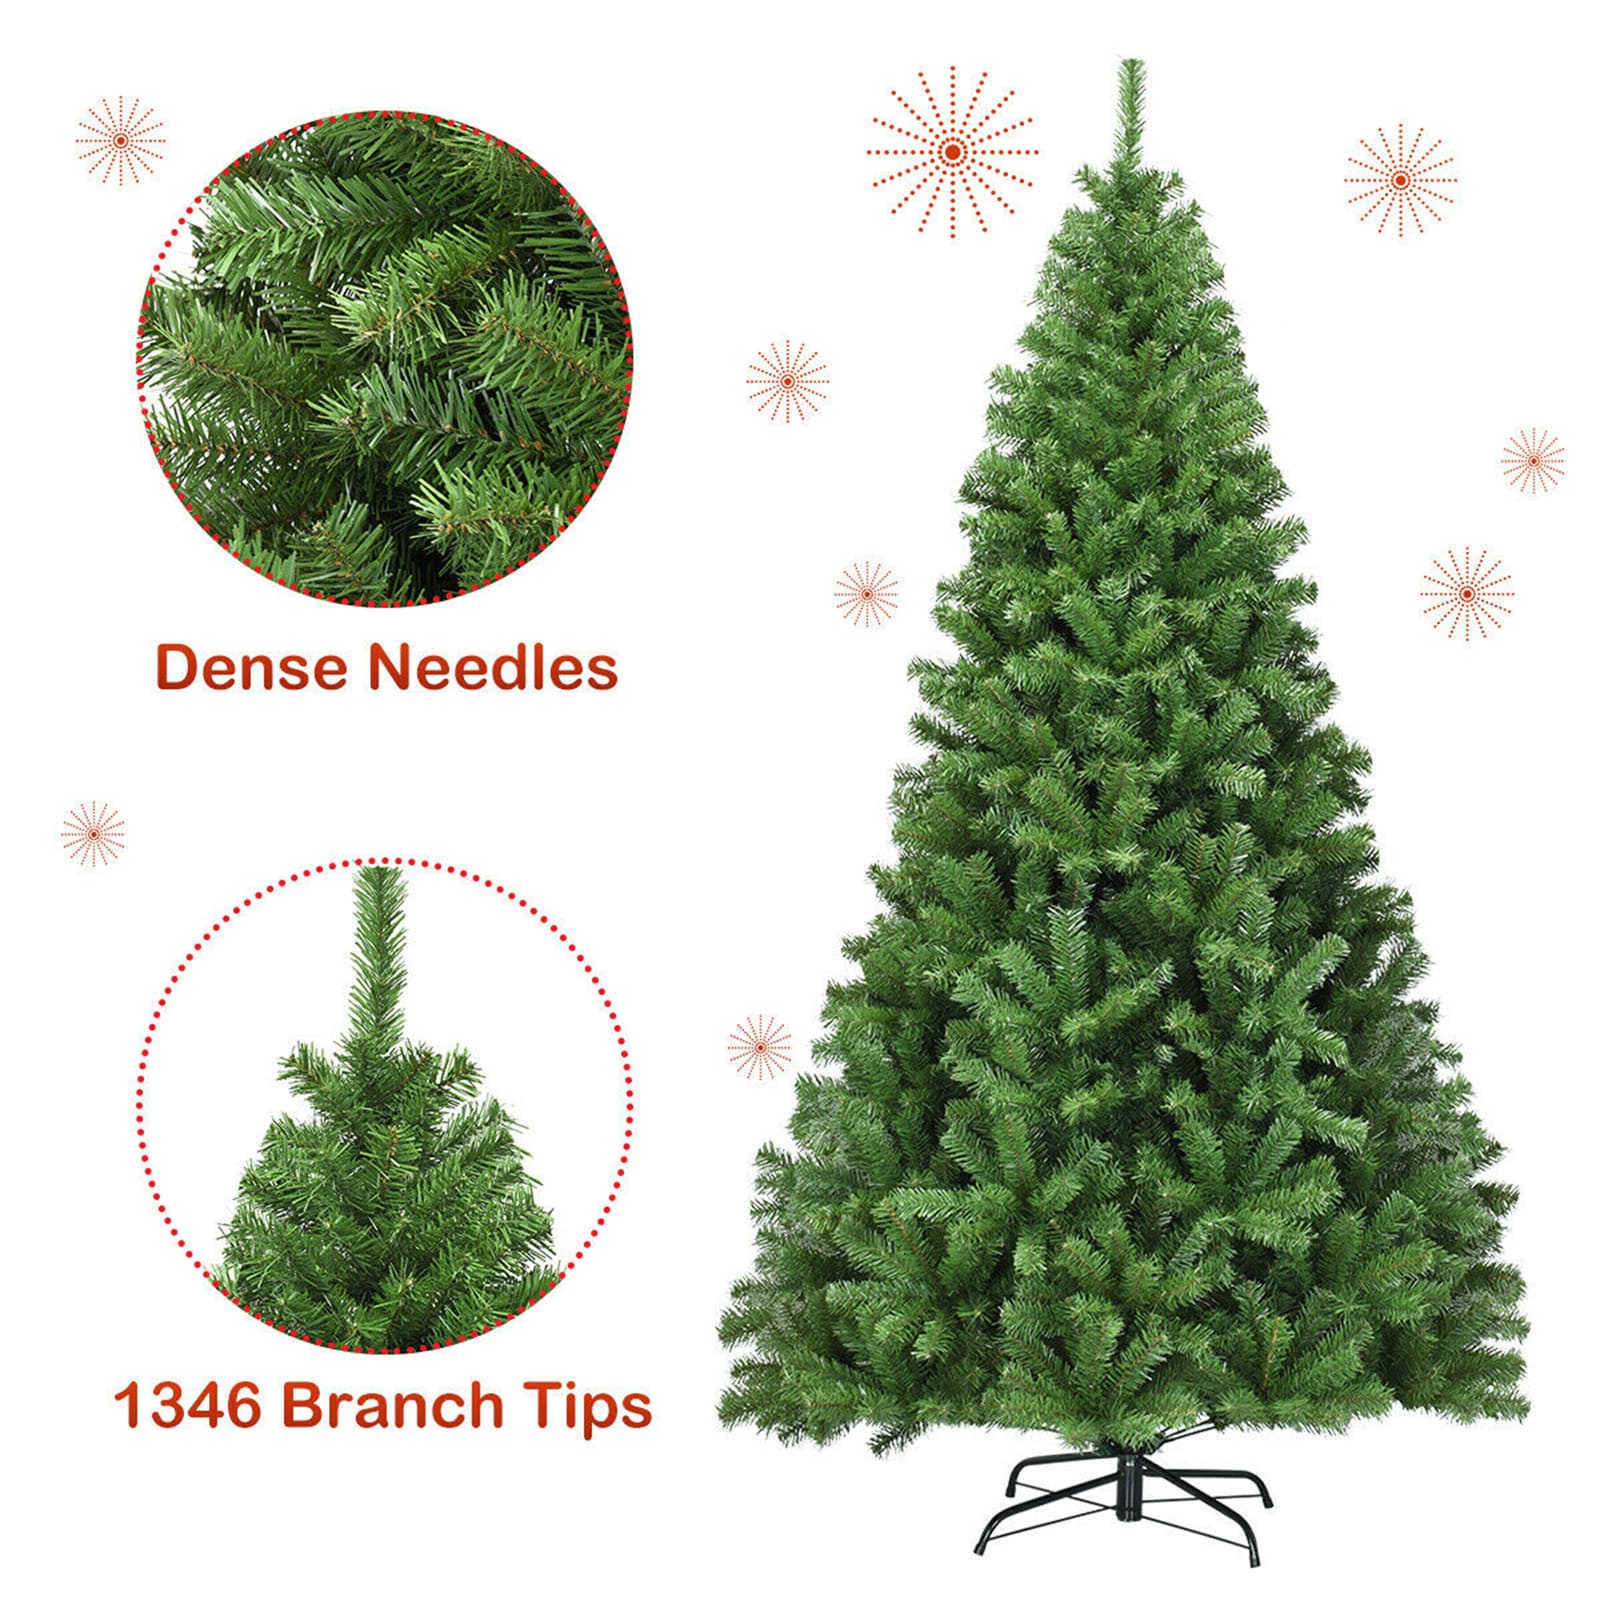 Forclover 7.5-ft Artificial Christmas Tree in the Artificial Christmas ...